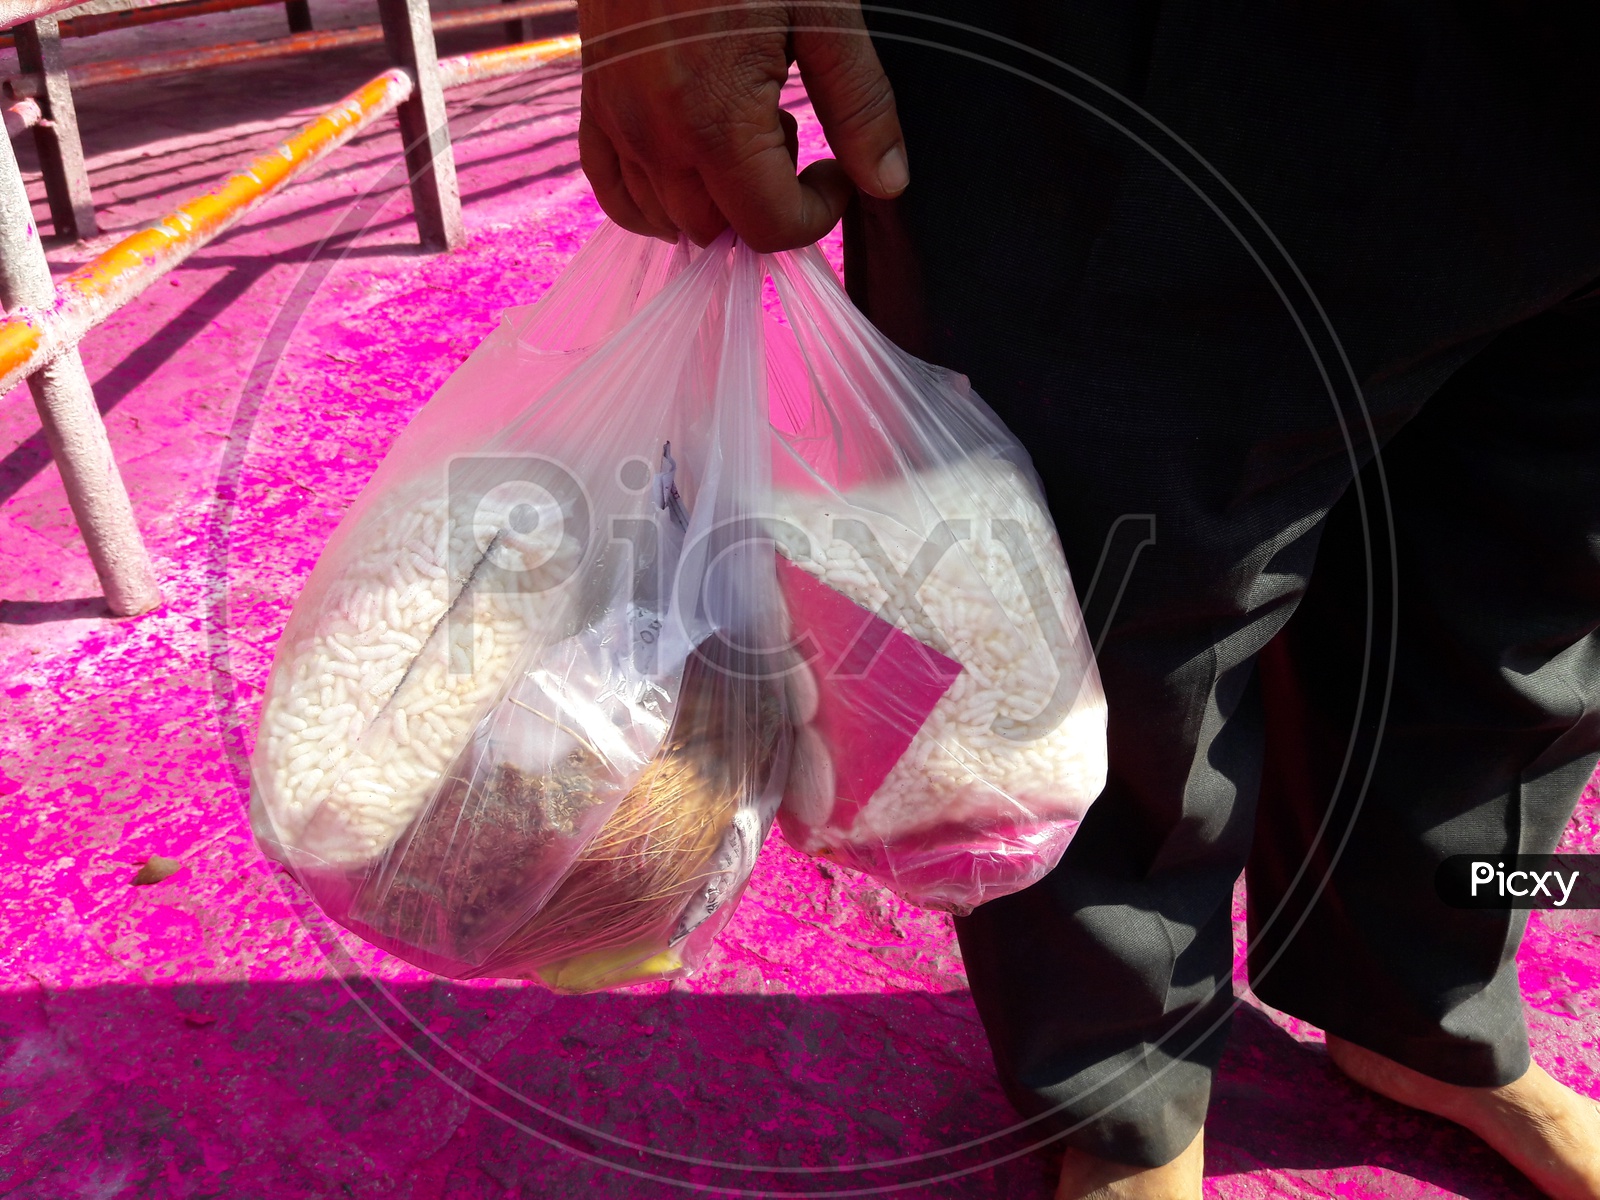 Indian Hindu Devotee Carrying Puffed Rice and Coconut In a Plastic Cover at Hindu Temple